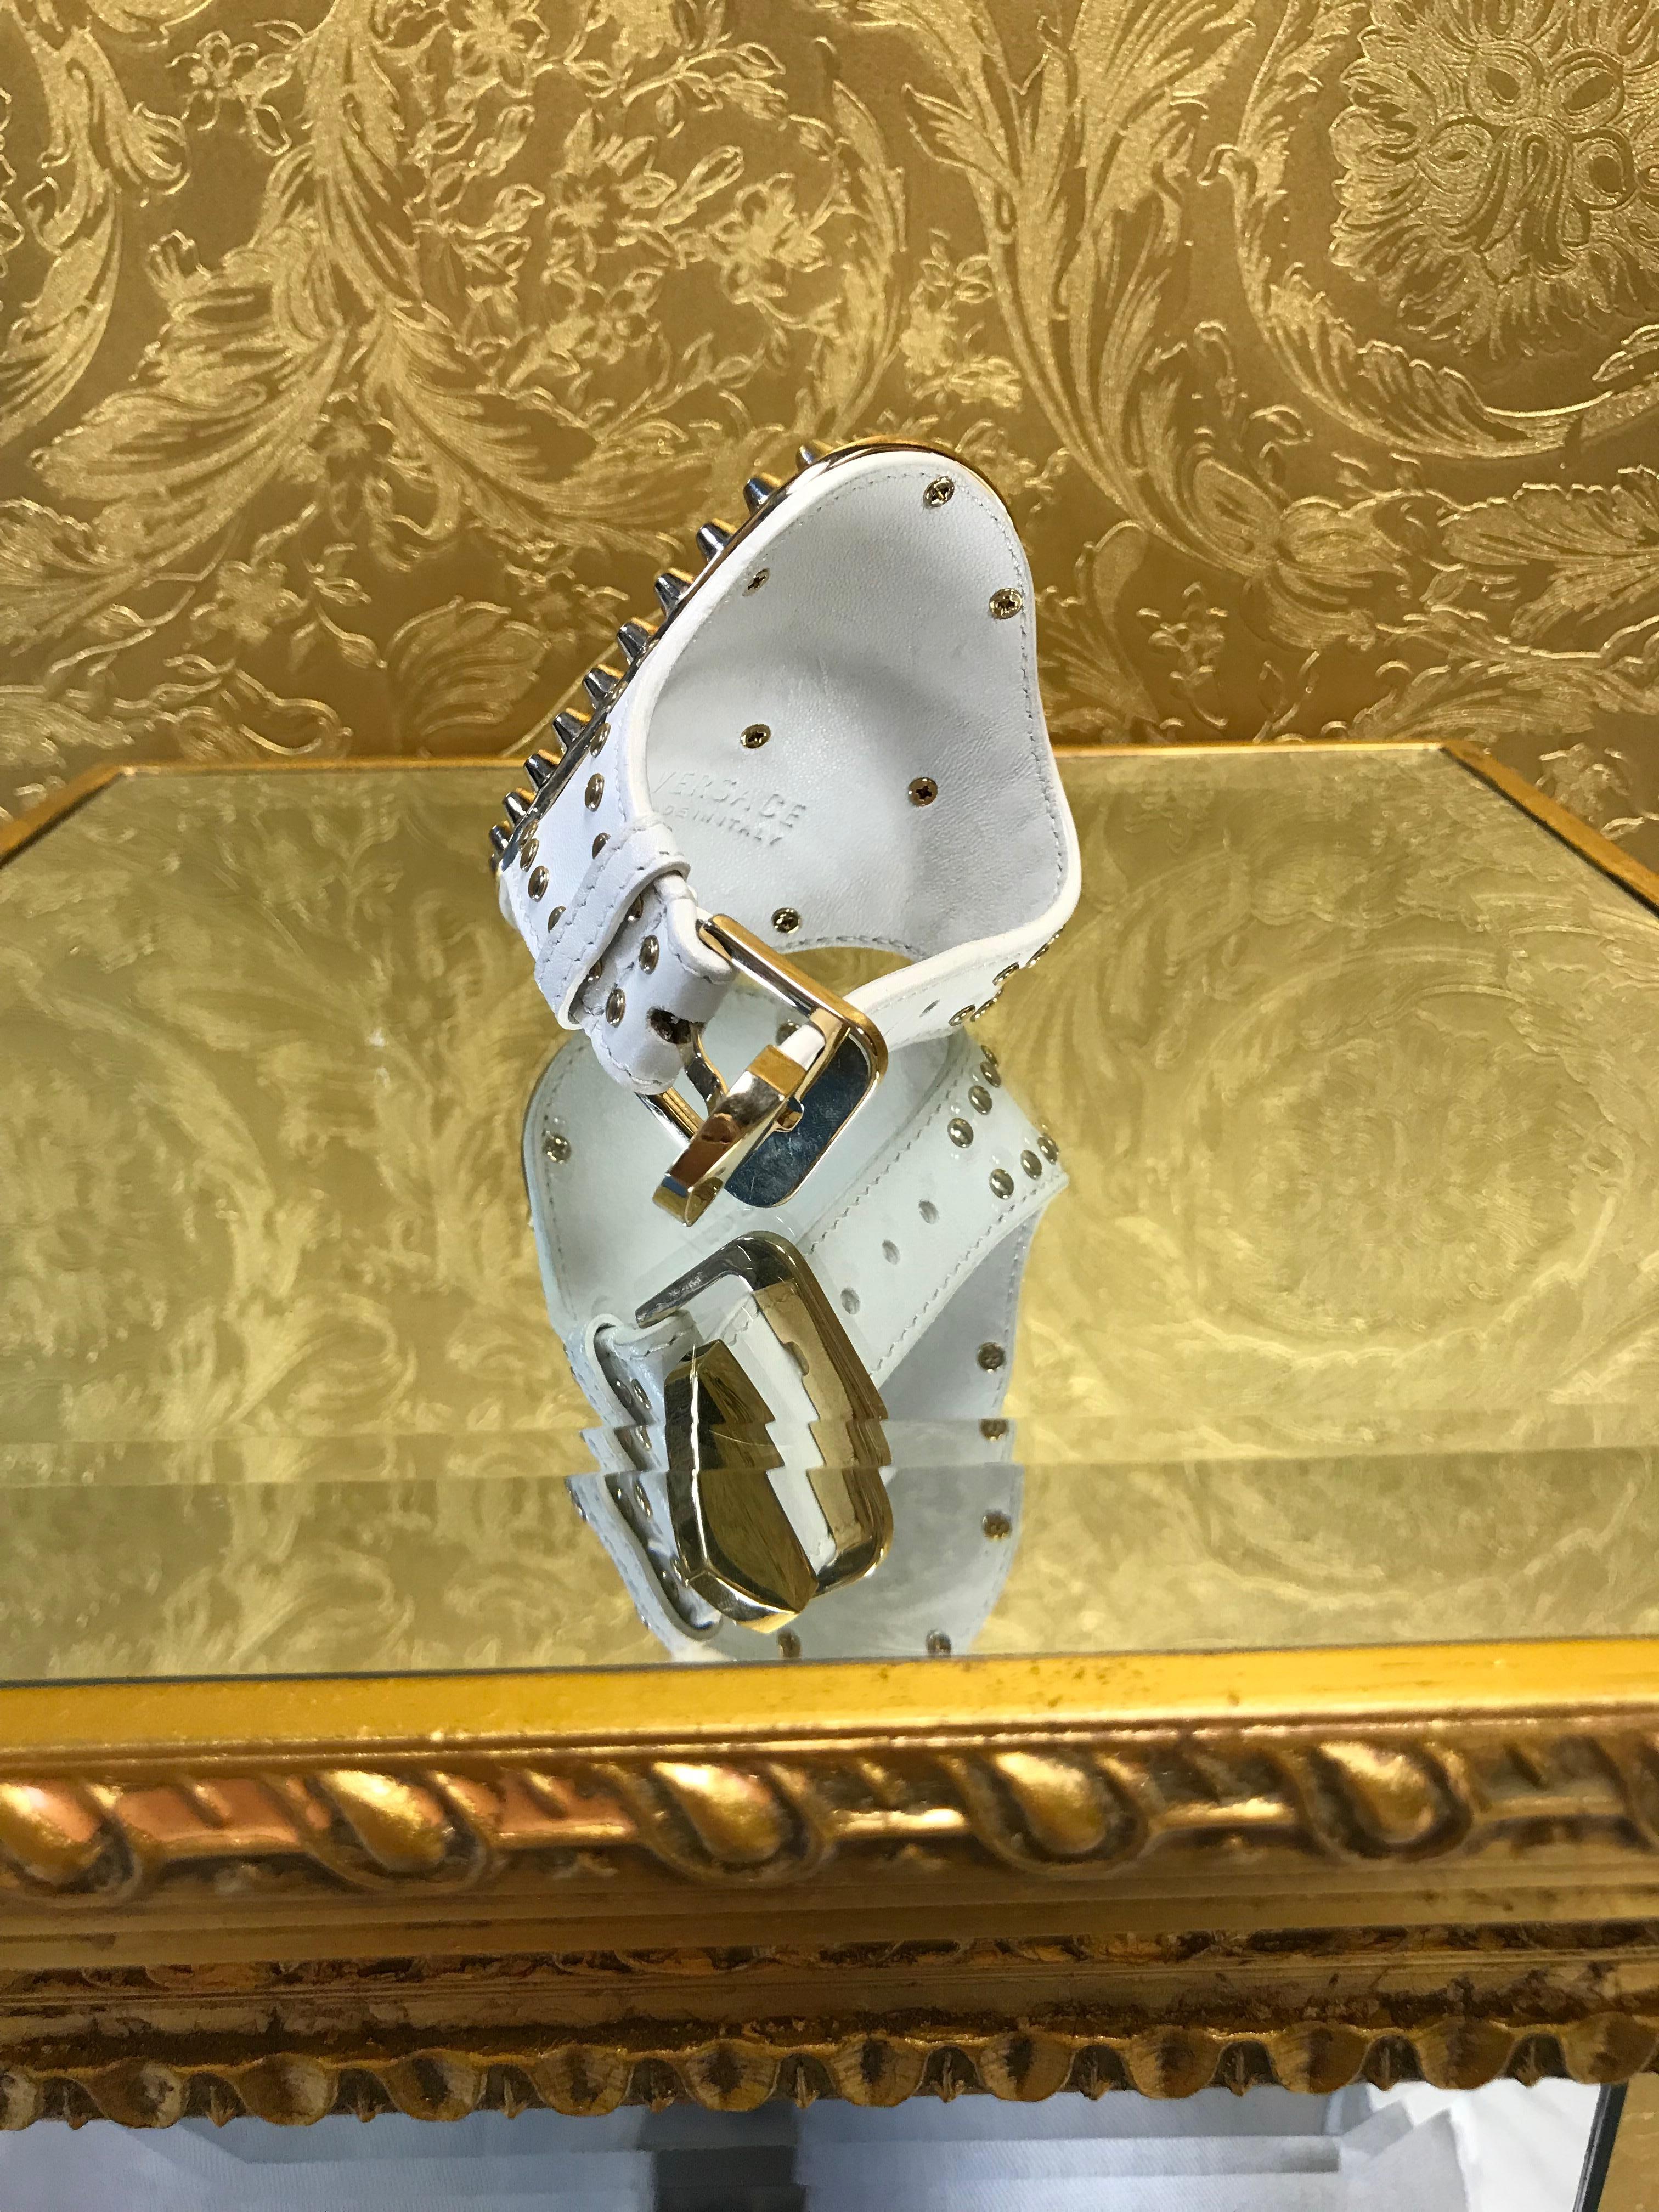 VERSACE

S/S 2012

Cuff bracelet in white leather.

Features Starfish on the medallion.

A definitely cool accessory.

Size selection: One size. 

100% metal, 100% leather

Made in Italy
New, with box

Last picture shows four cuffs from this